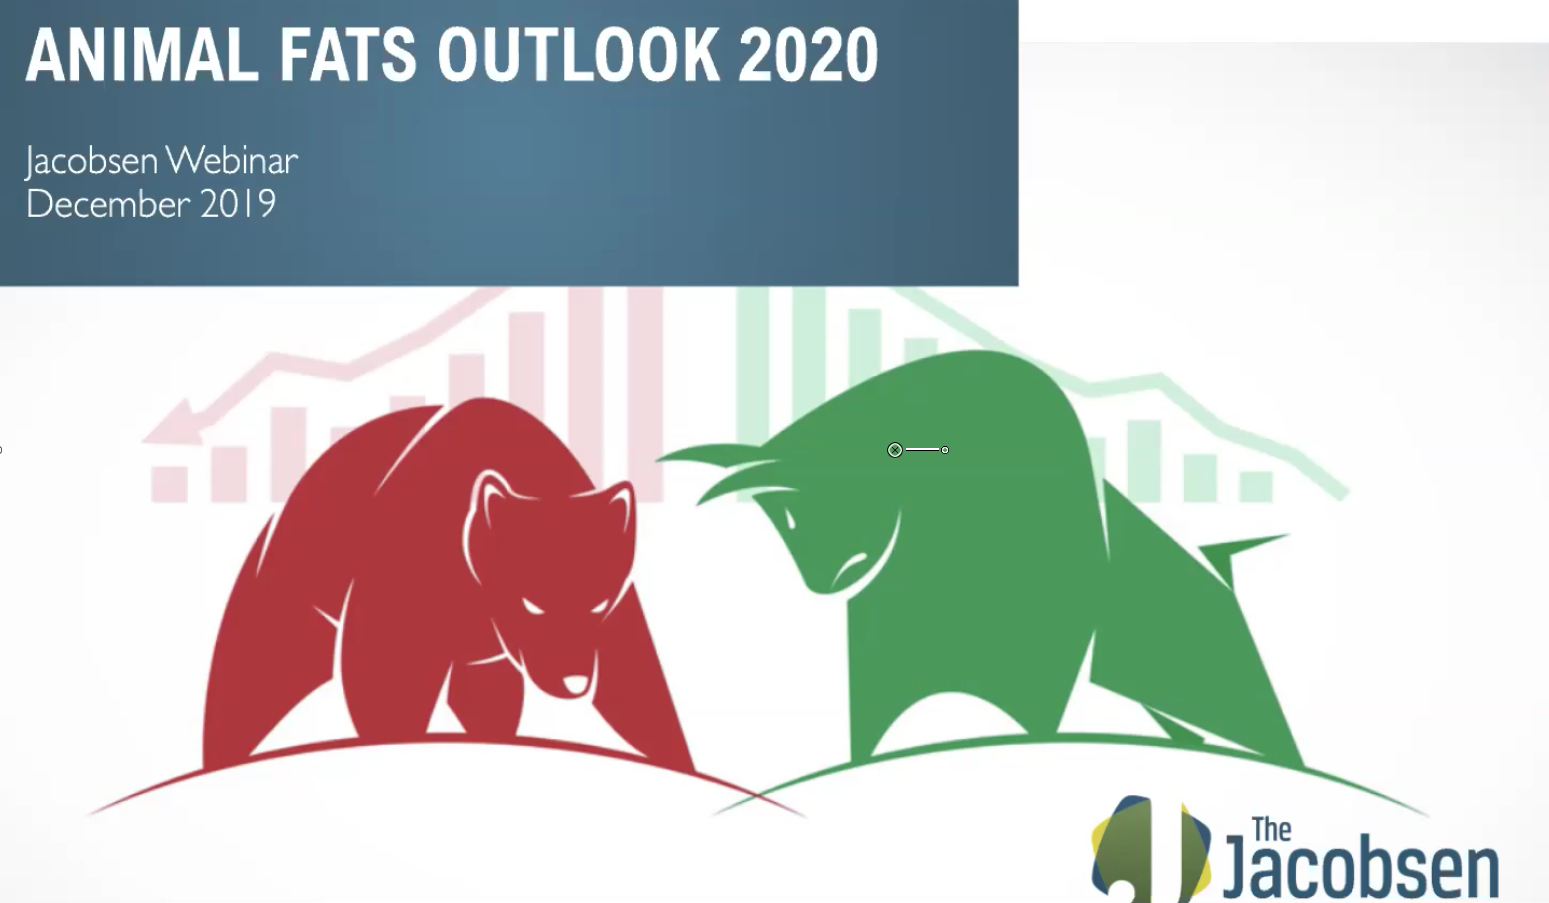 Animal Fats & Oils Outlook for 2020